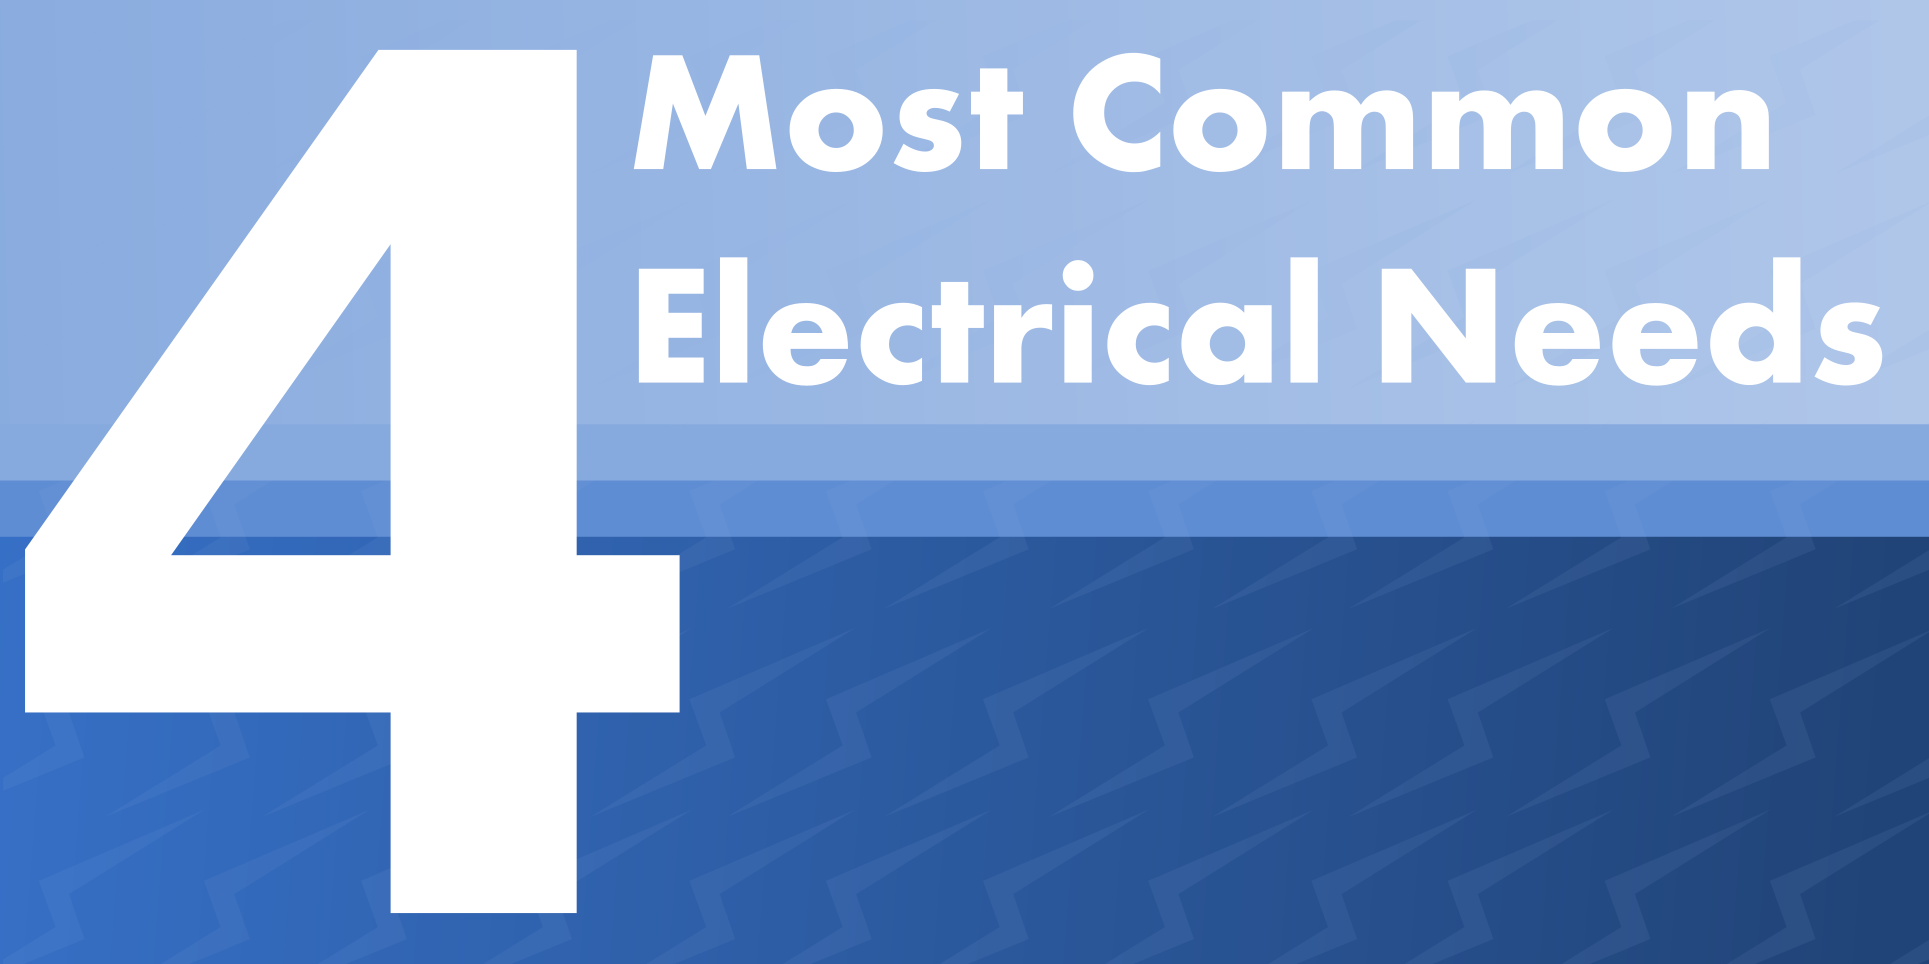 4 Most Common Electrical Needs